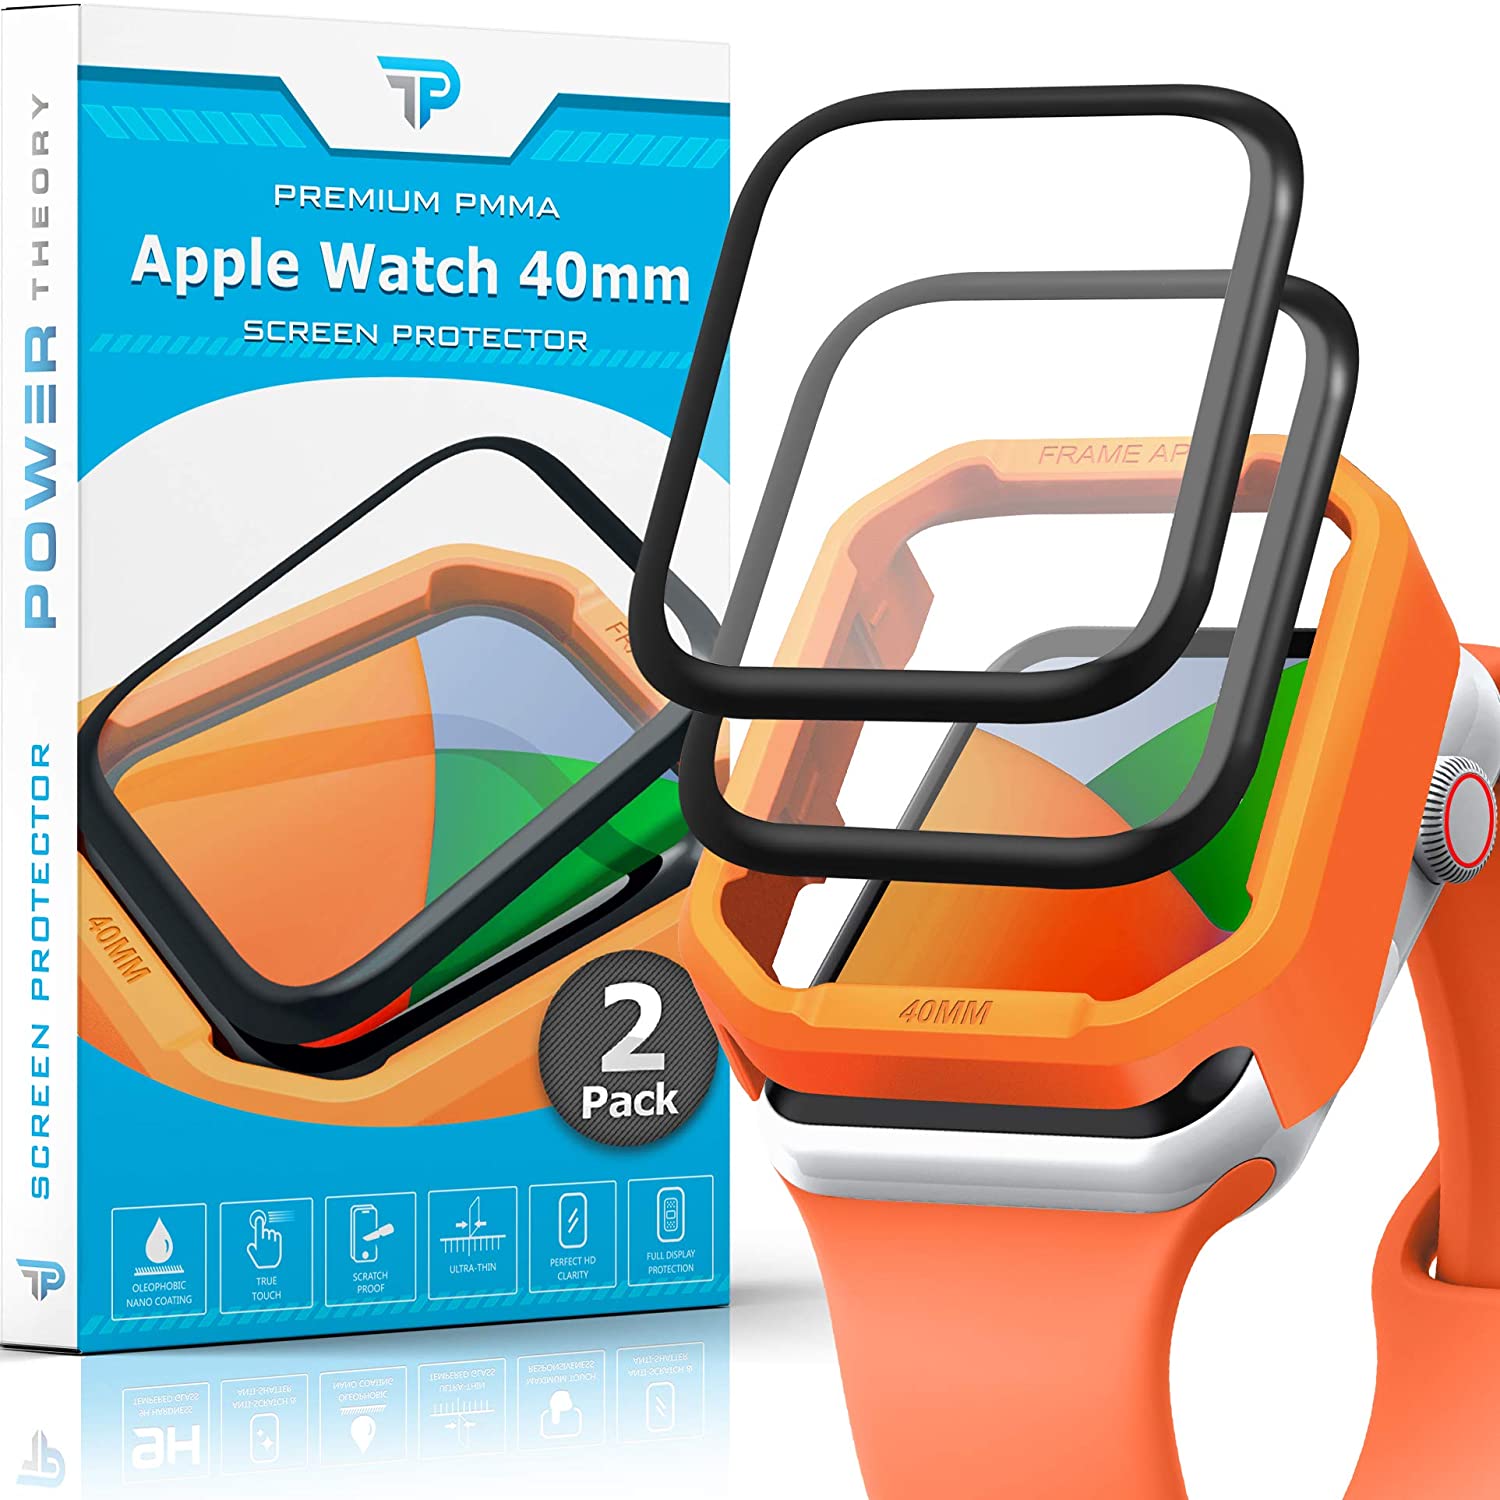 Apple Watch 40mm Premium PMMA Screen Protector [2-Pack]